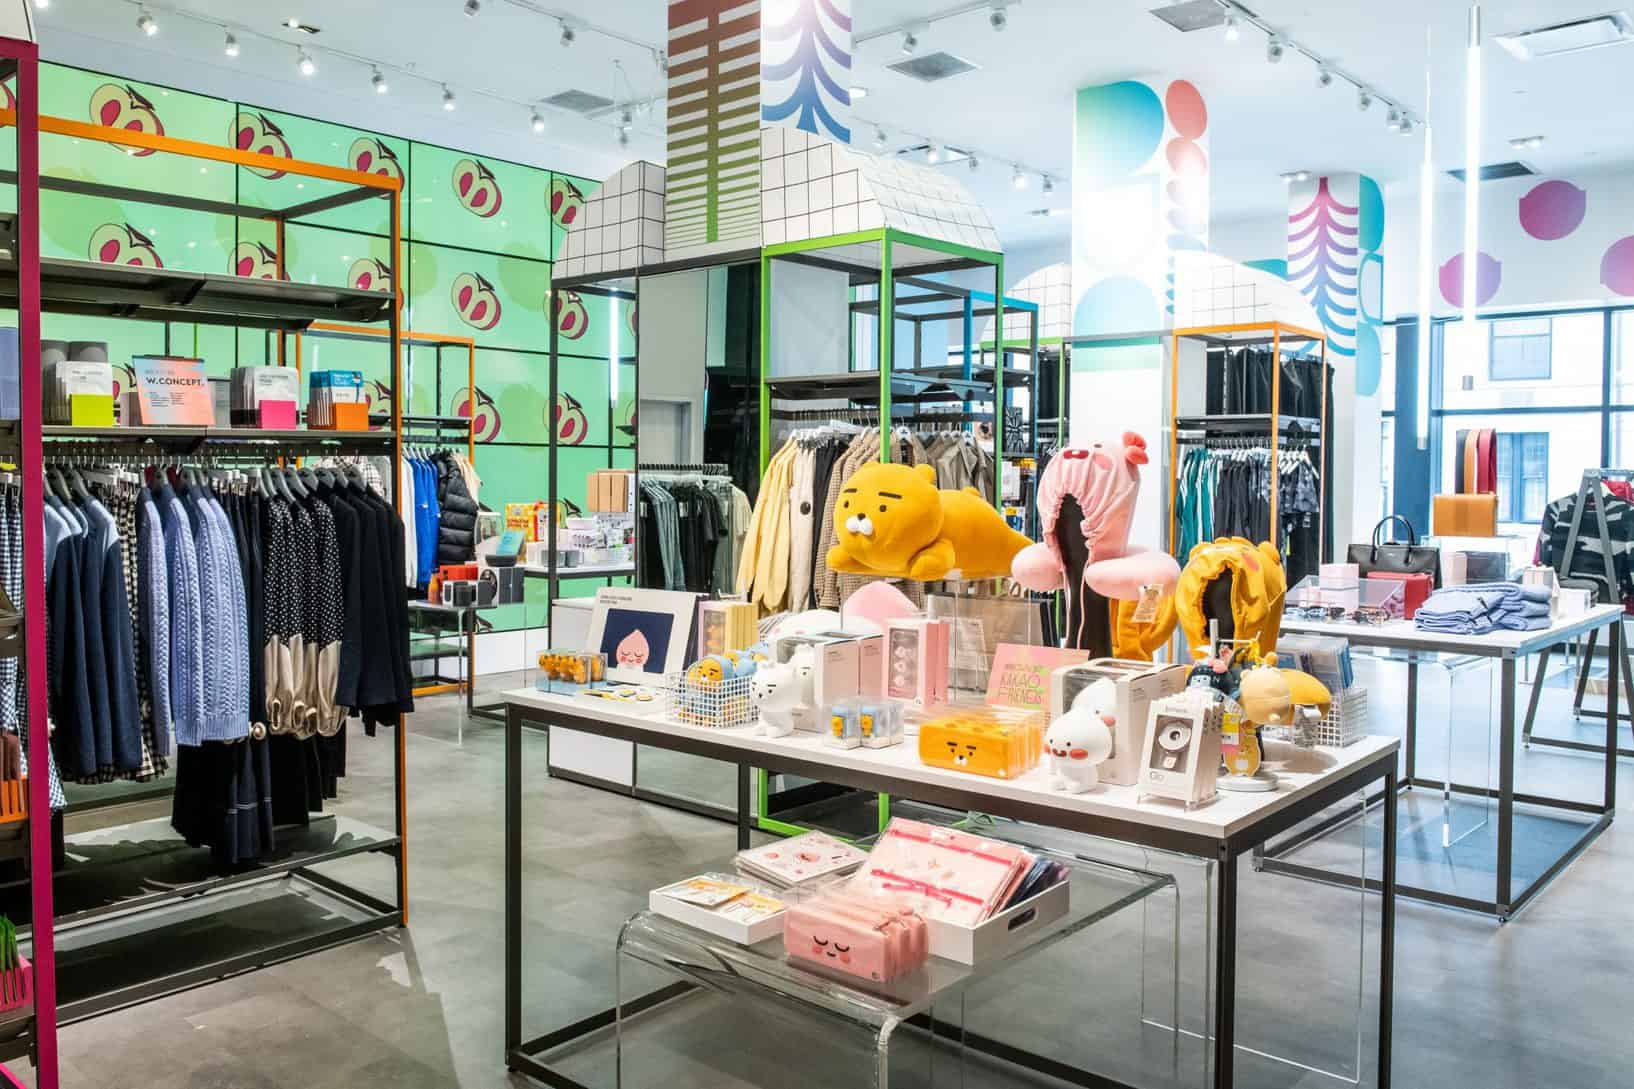 BLOOMINGDALE'S OPENS A 'WINDOW INTO SEOUL' FOR ITS NEXT CAROUSEL